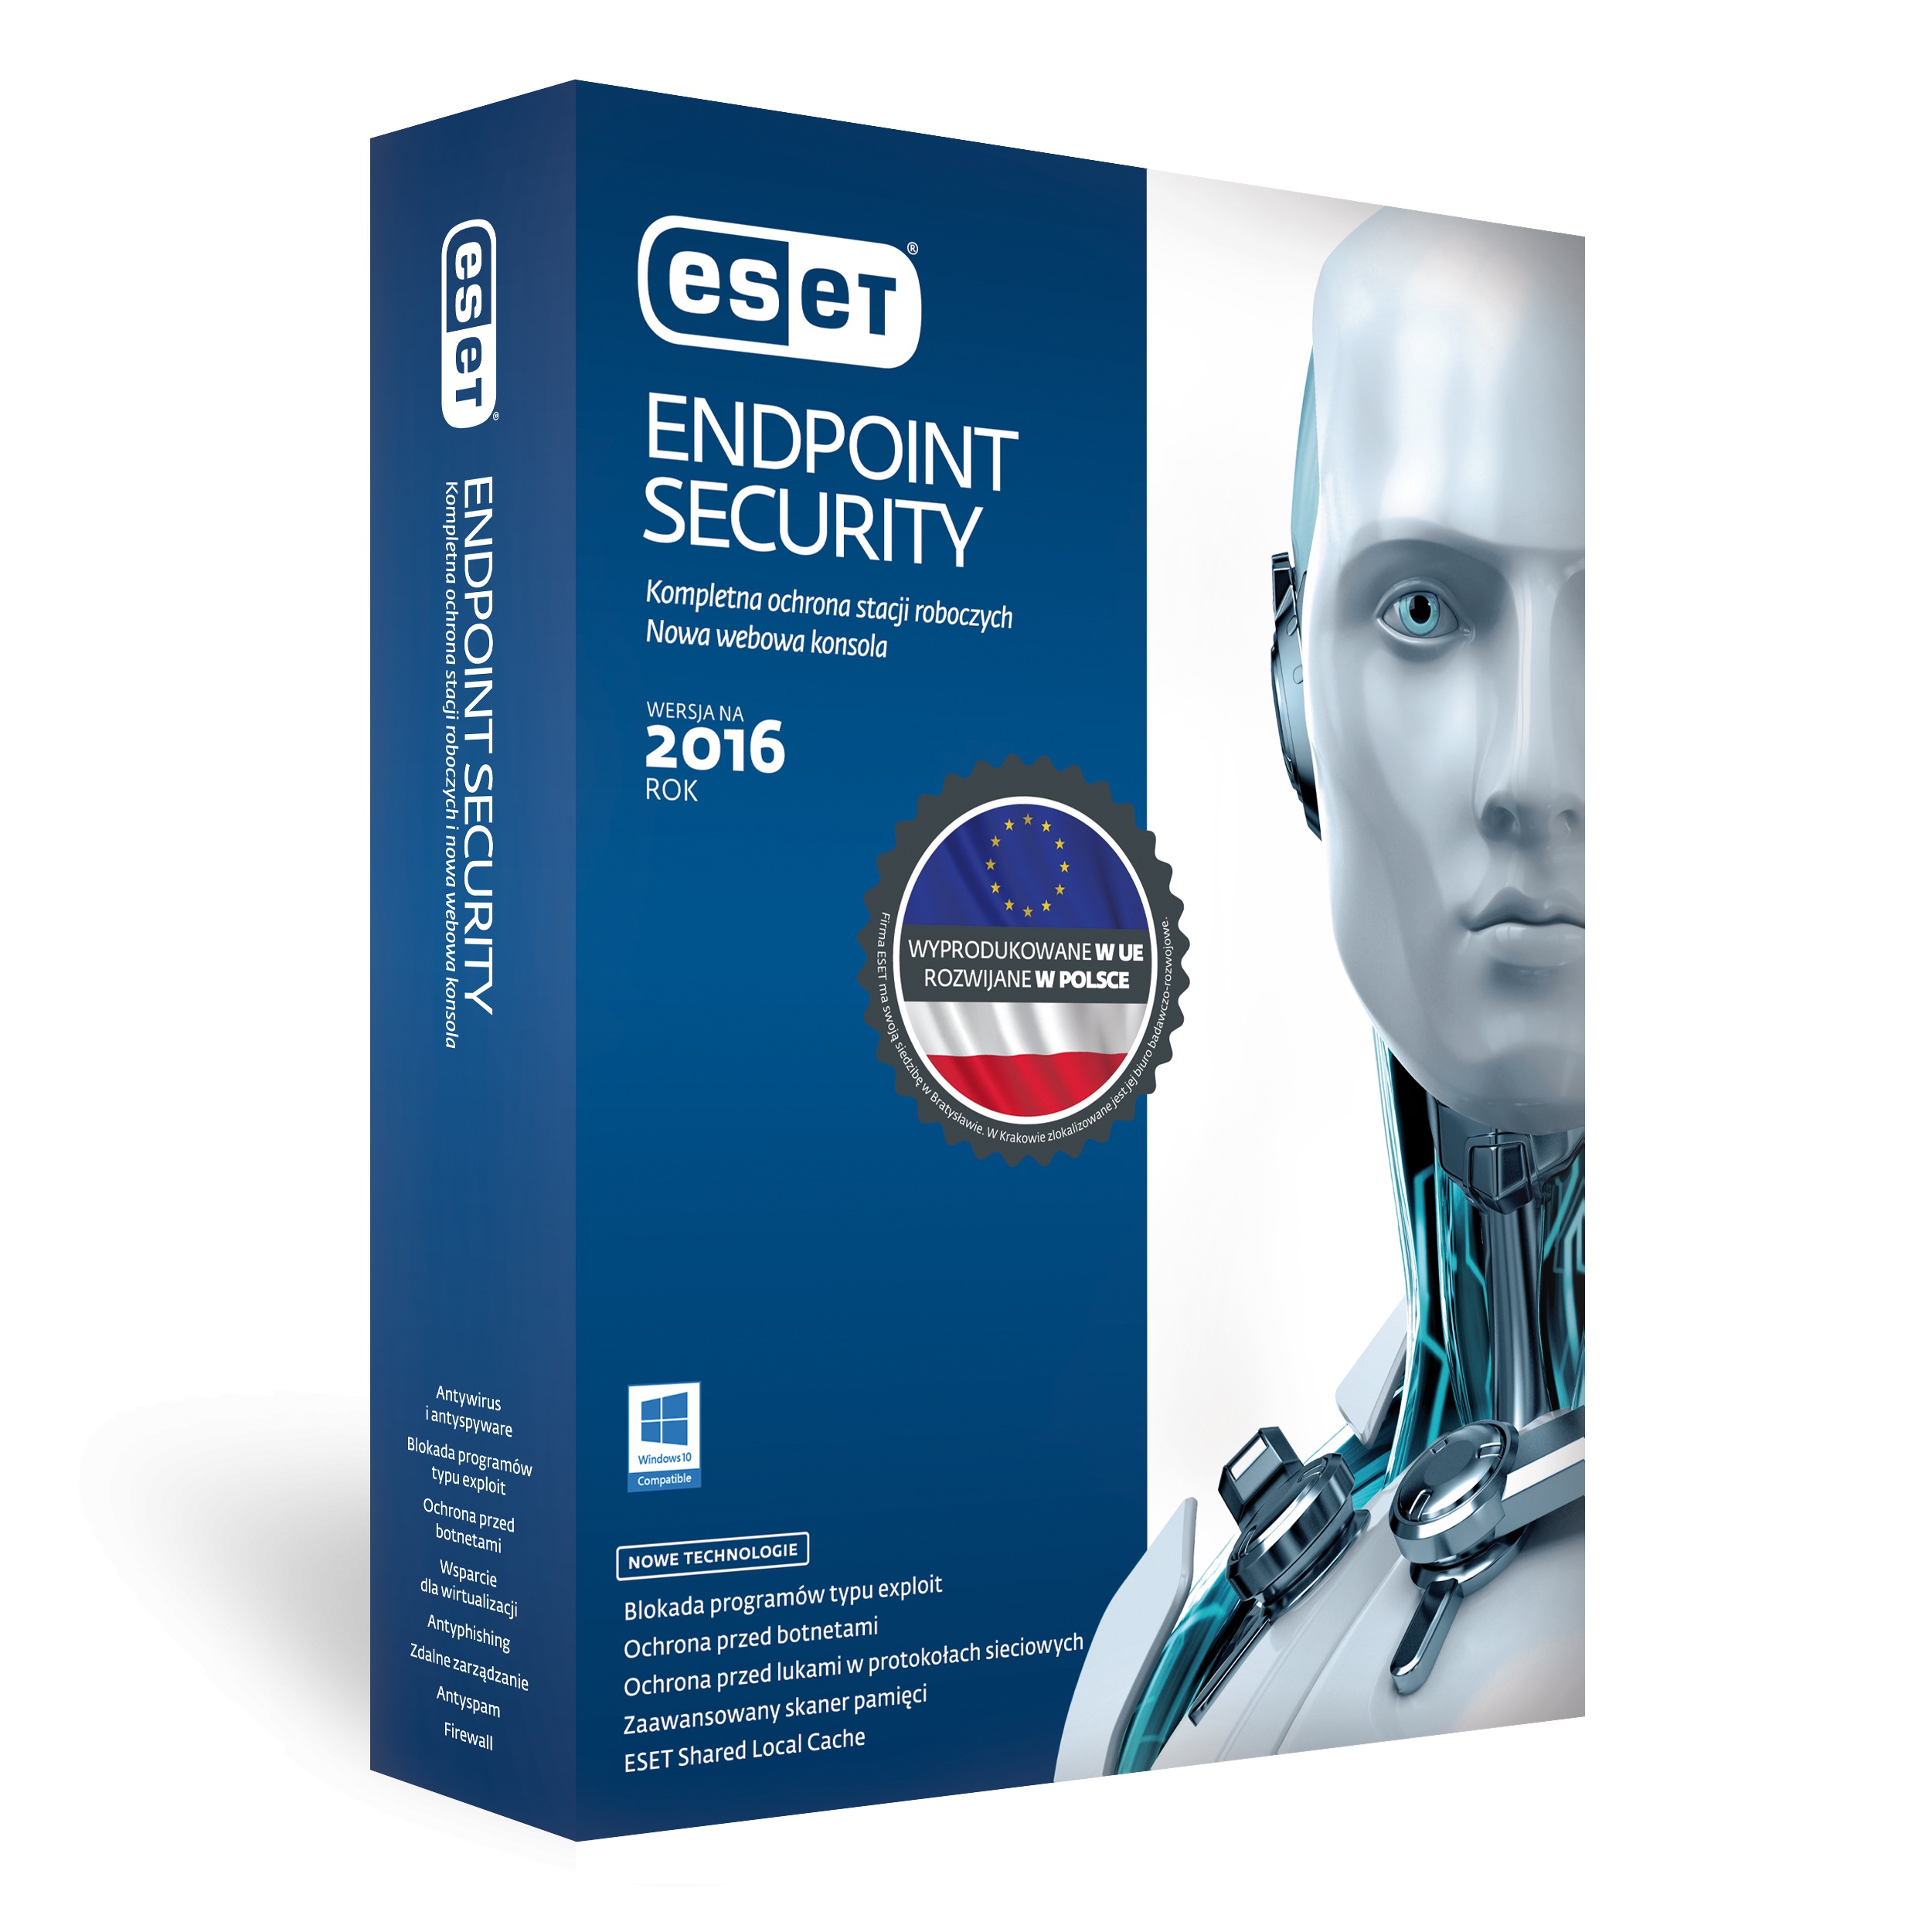 ESET Endpoint Security 10.1.2046.0 download the last version for iphone